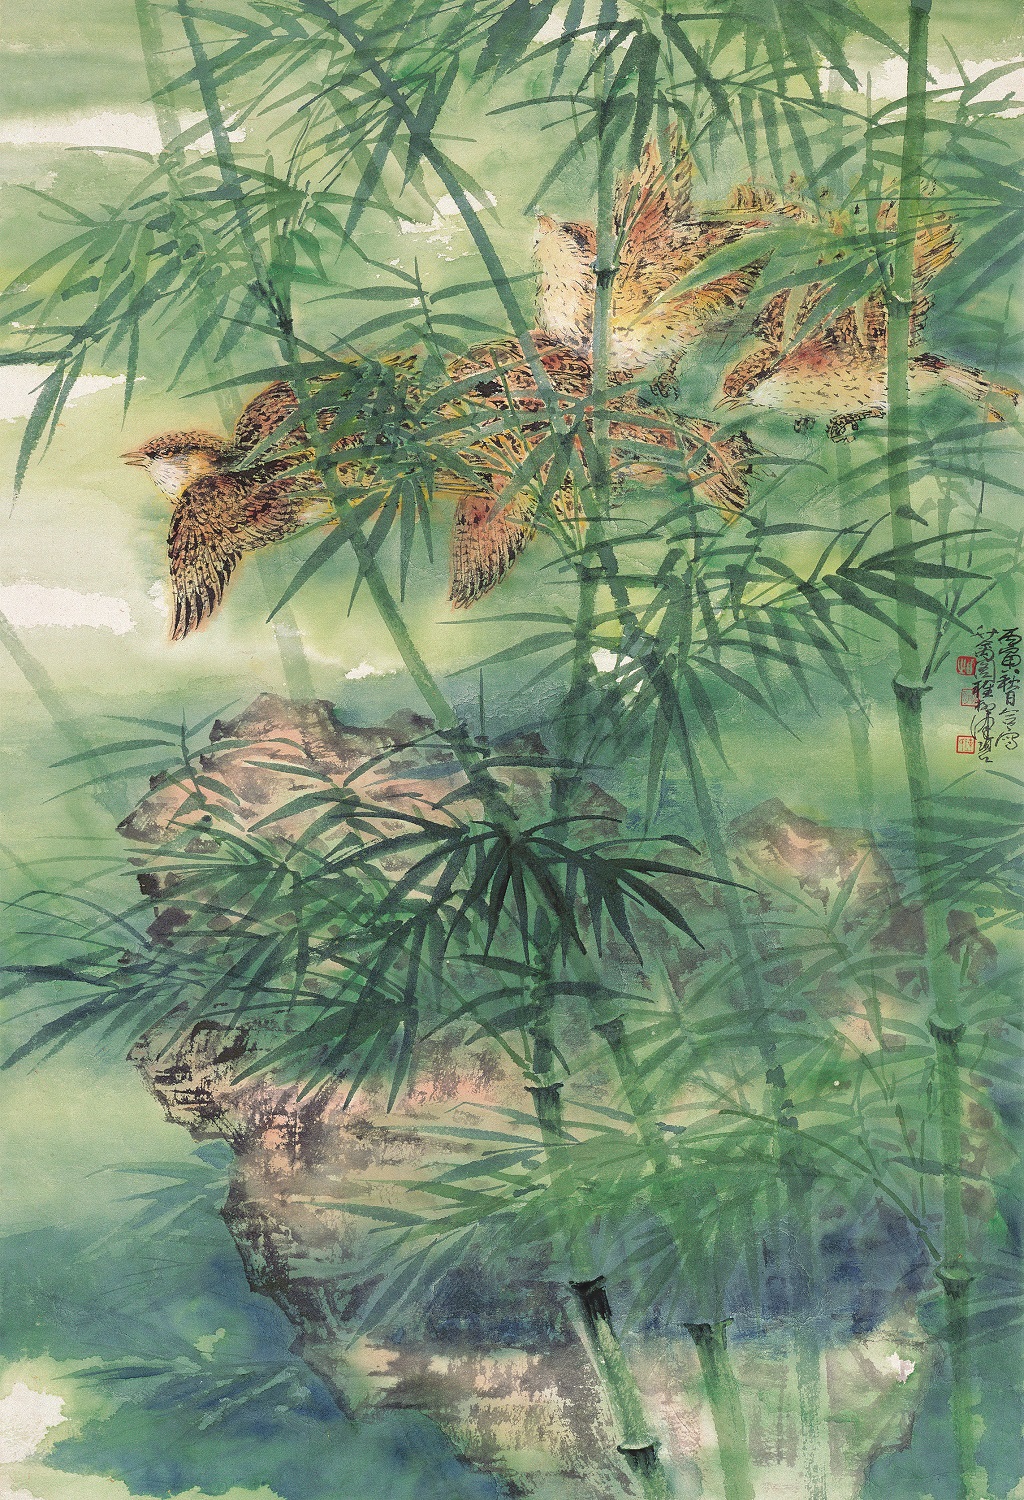 Birds and bamboo